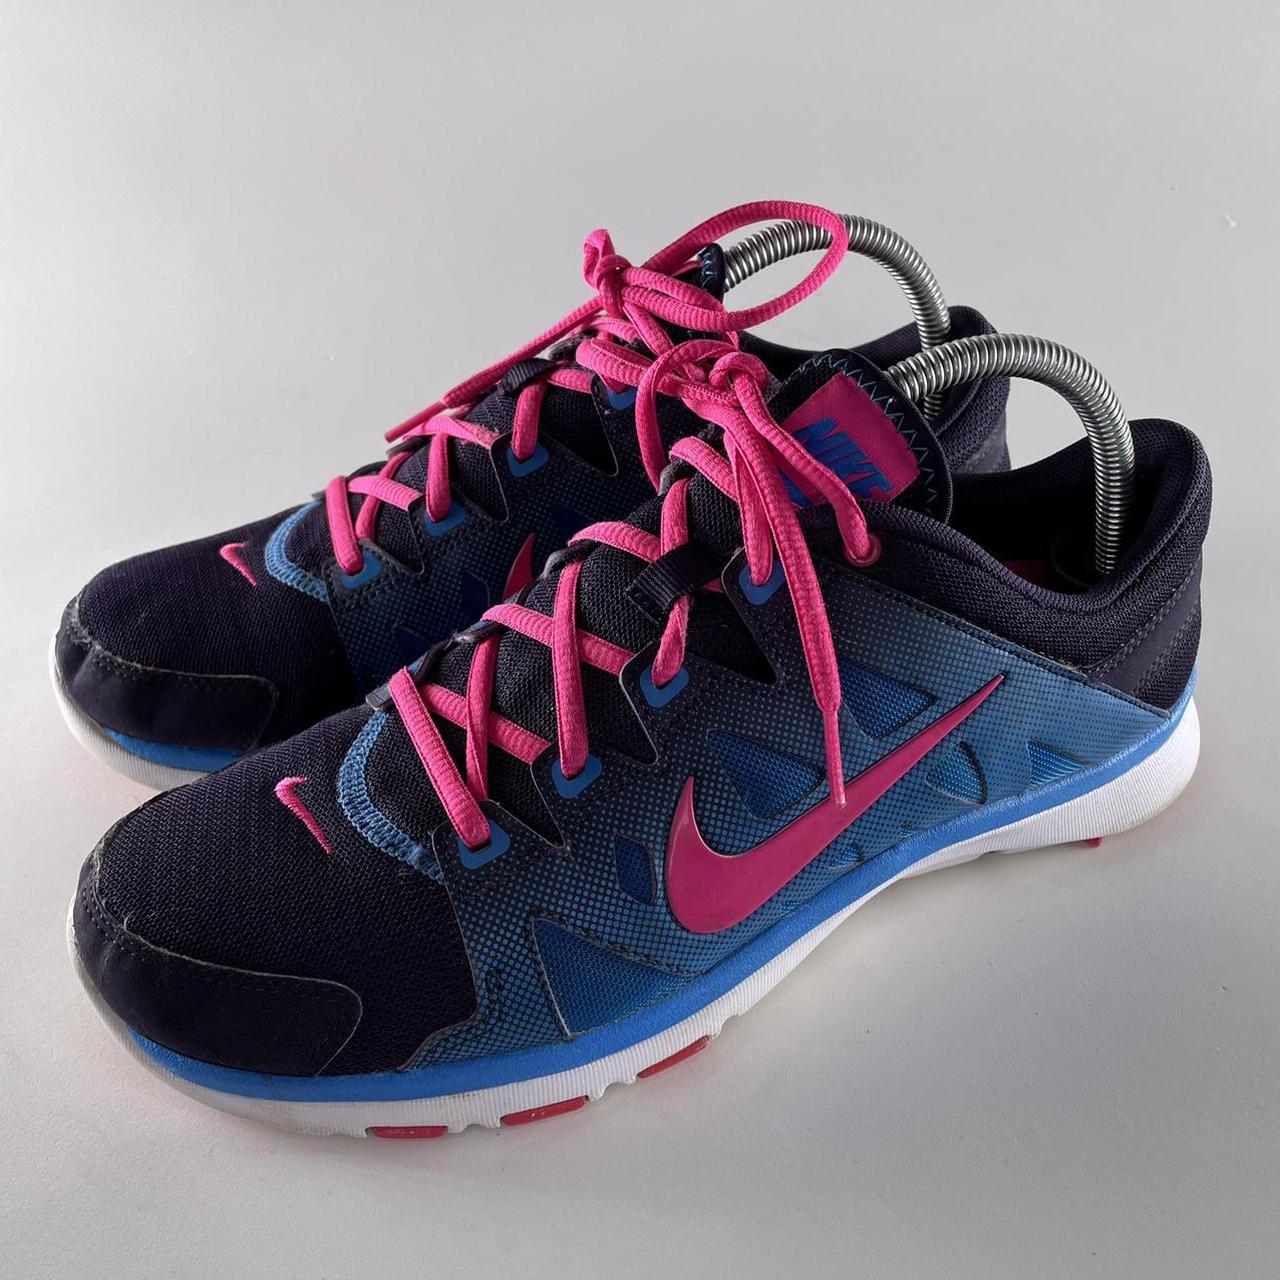 Training Fitsole Womens Running Shoes Pink...